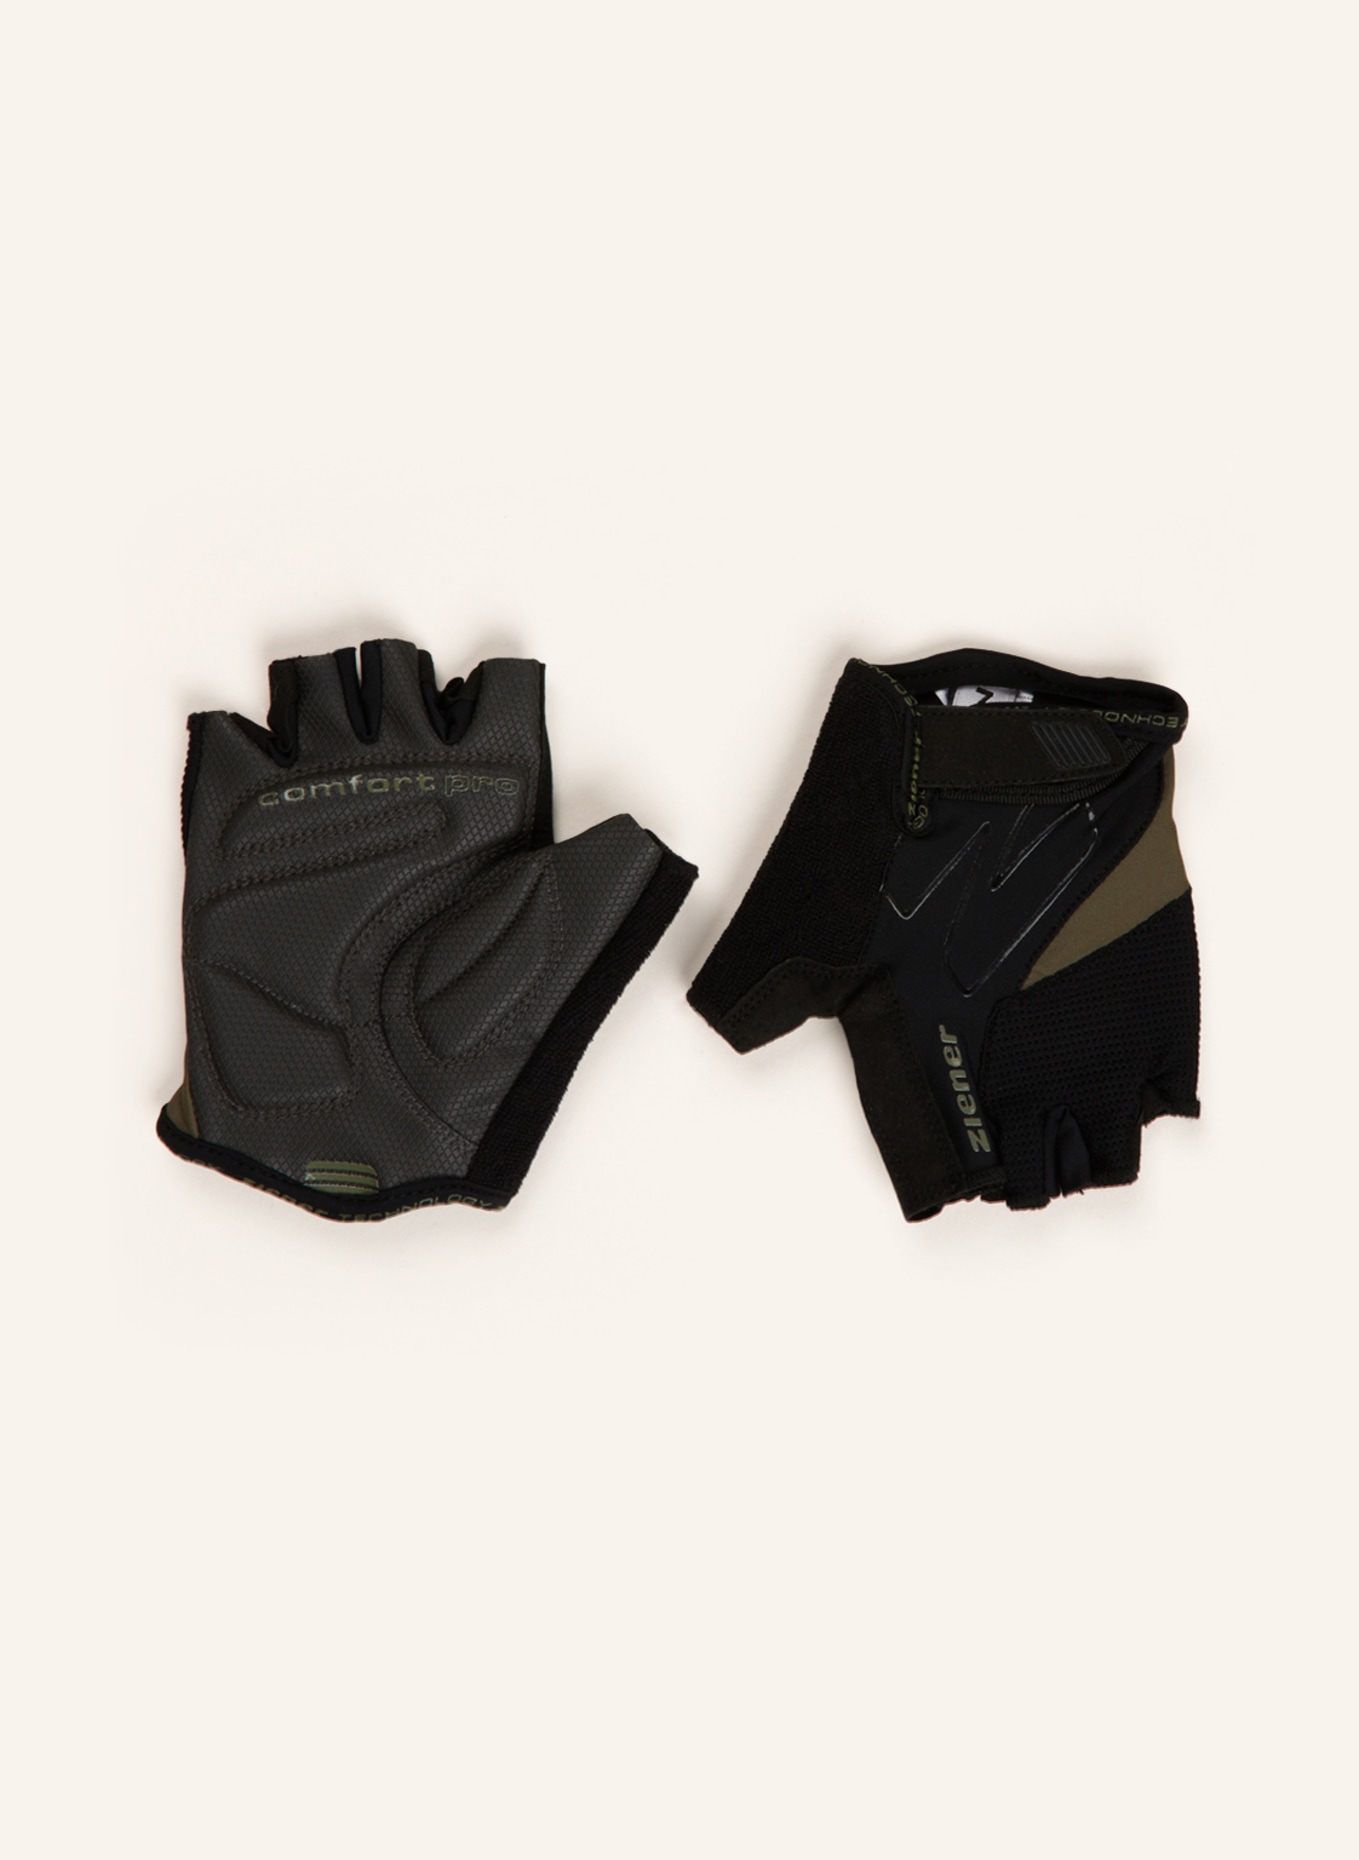 ziener Cycling gloves in khaki CRAVE black